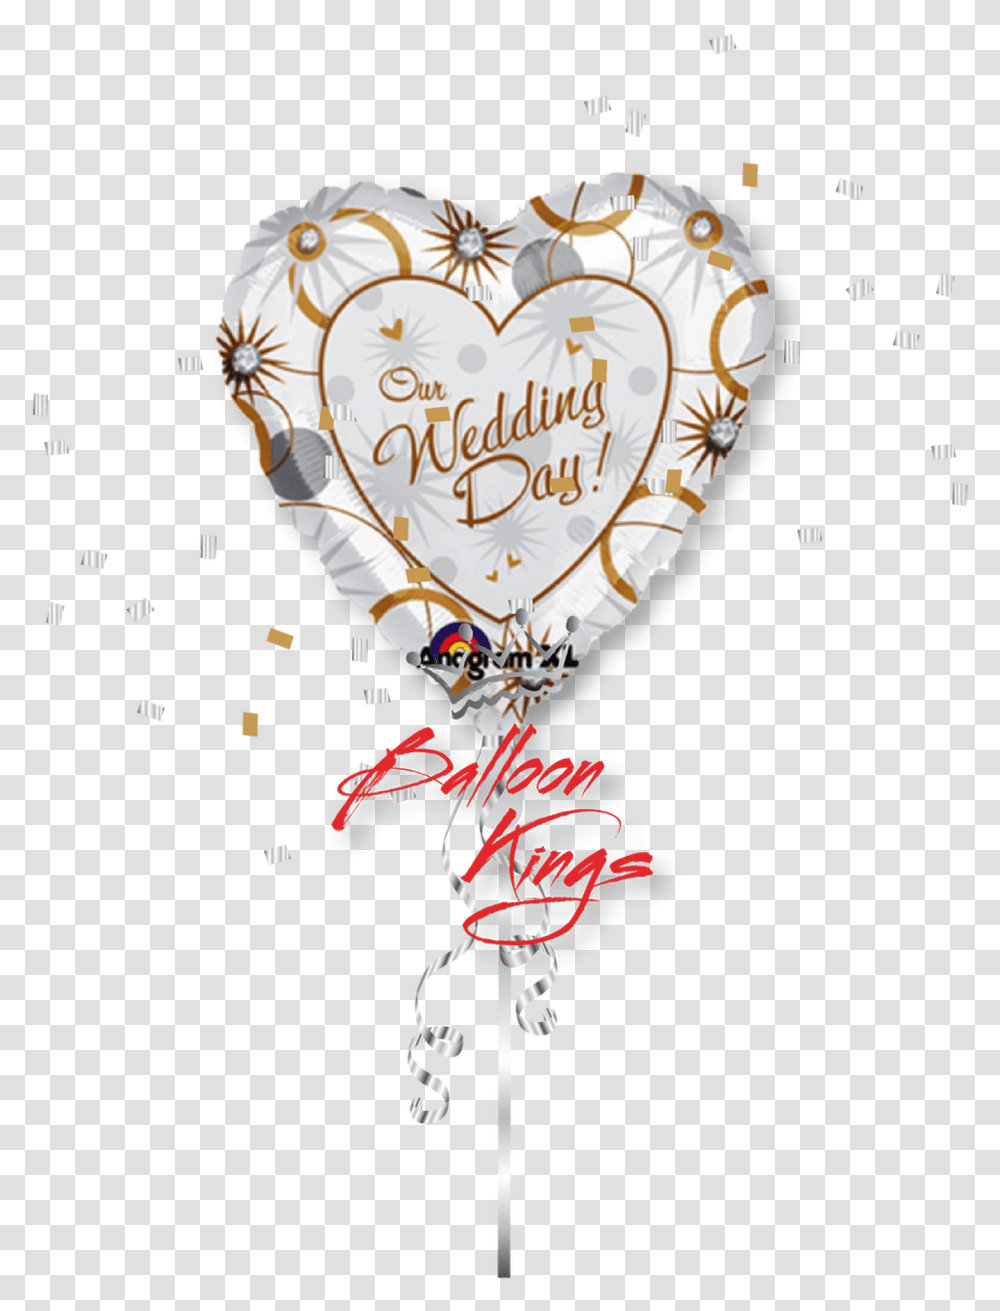 Our Wedding Day Balloon, Heart, Paper, Confetti Transparent Png